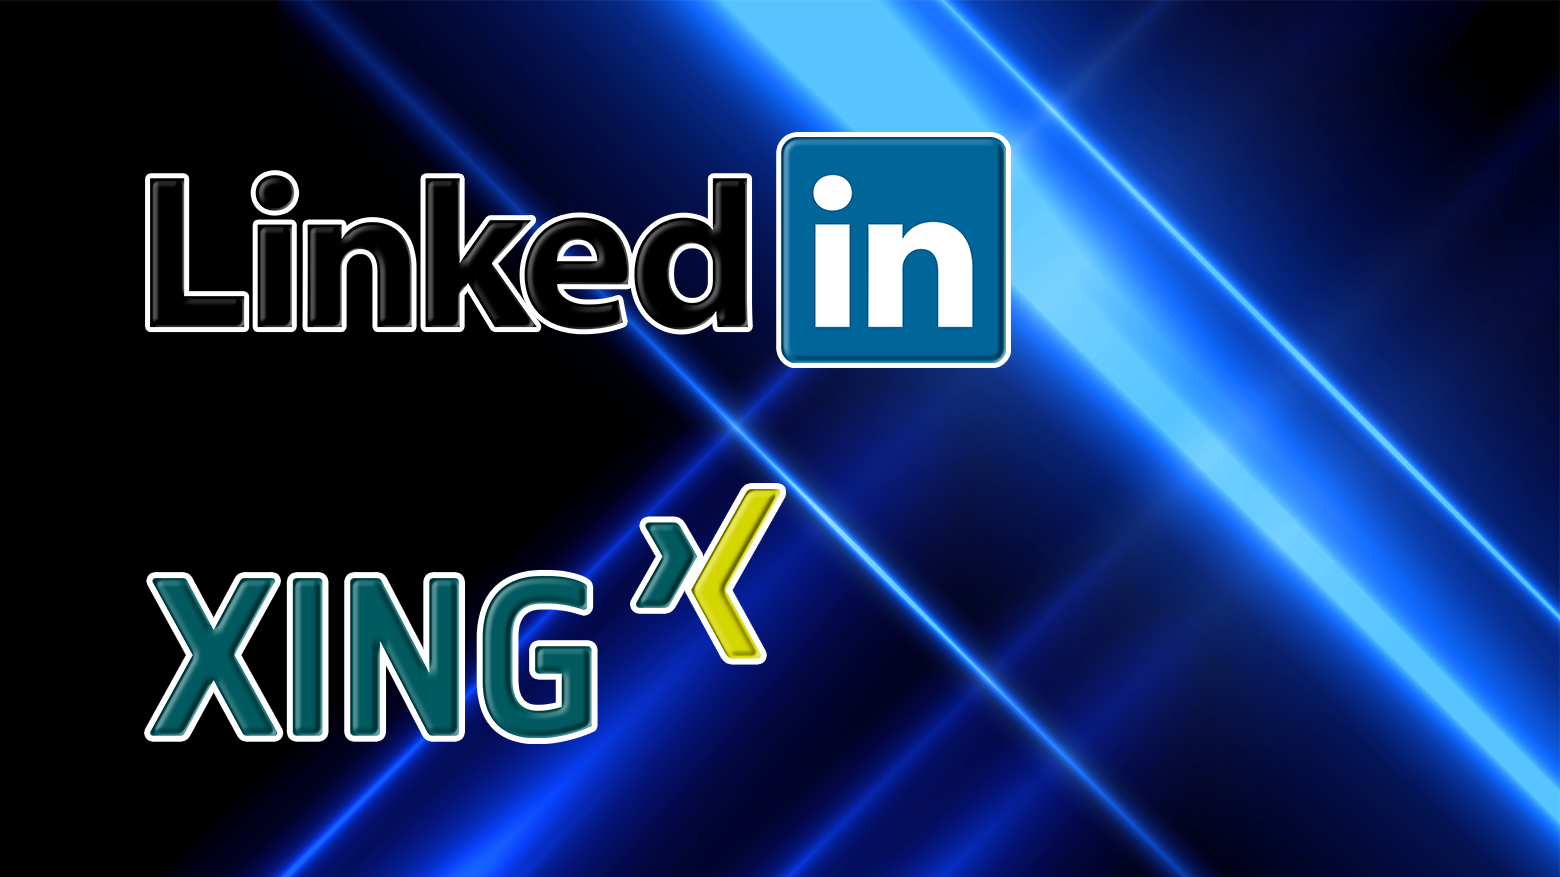 New - createch ag on LinkedIn and Xing